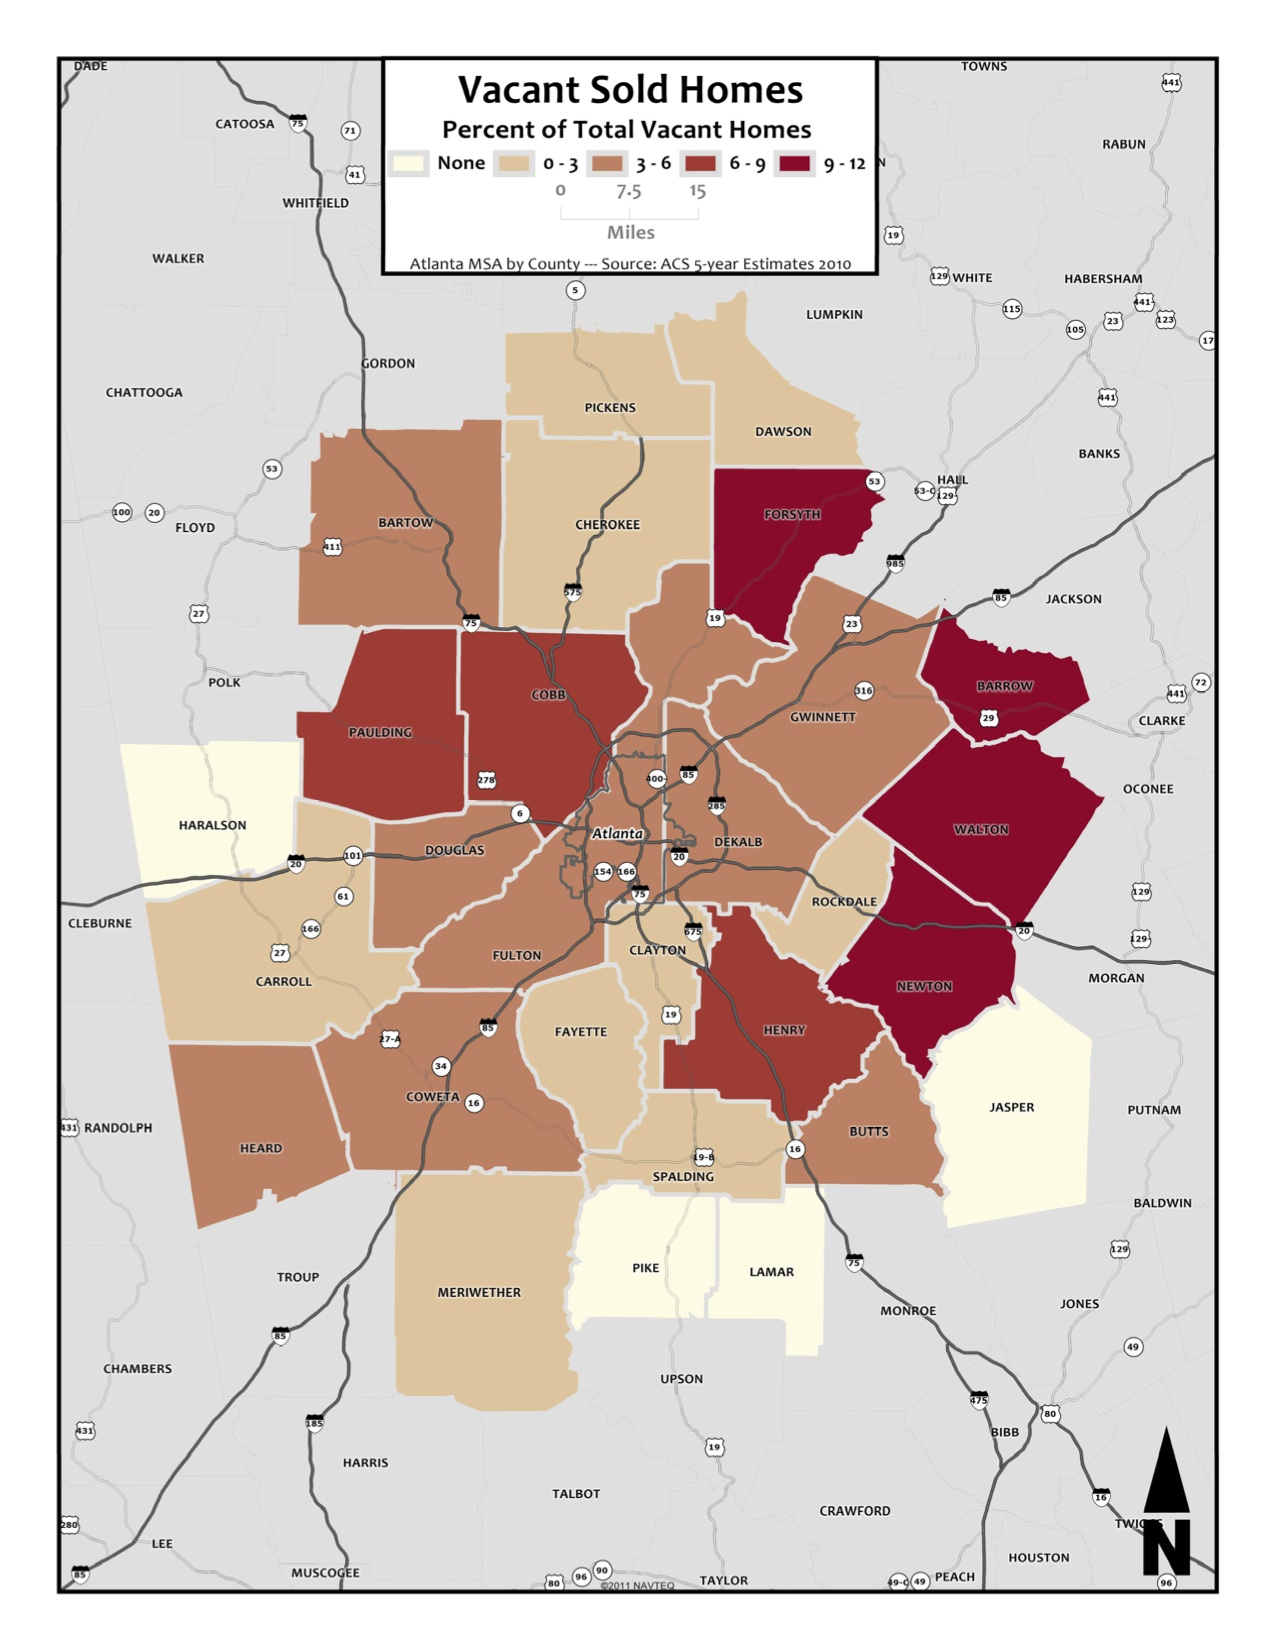 Vacant Sold Homes – metro counties